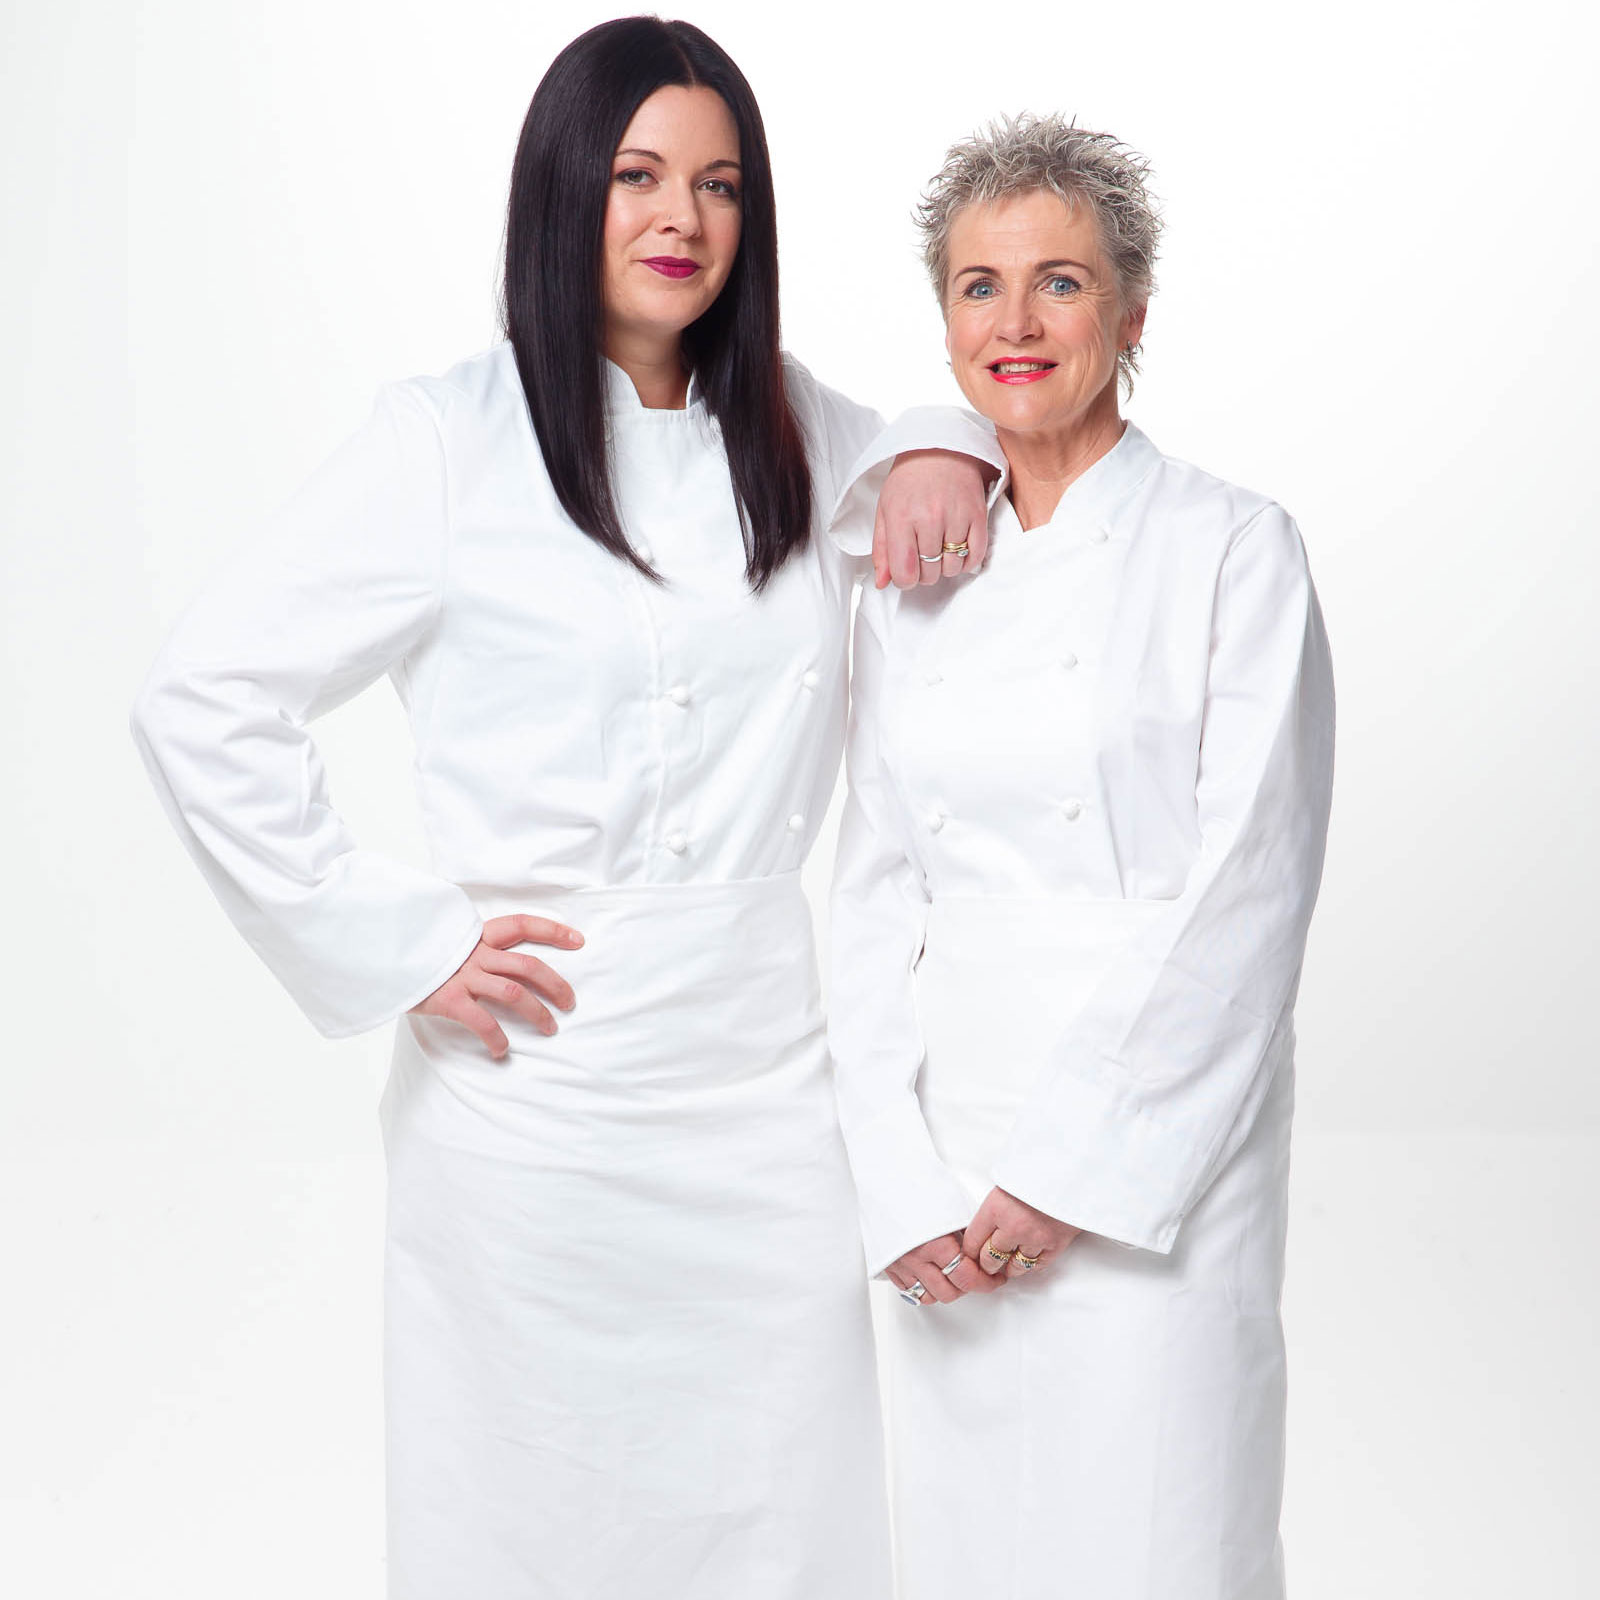 MKR: Undercooked lamb sends mother-daughter duo home